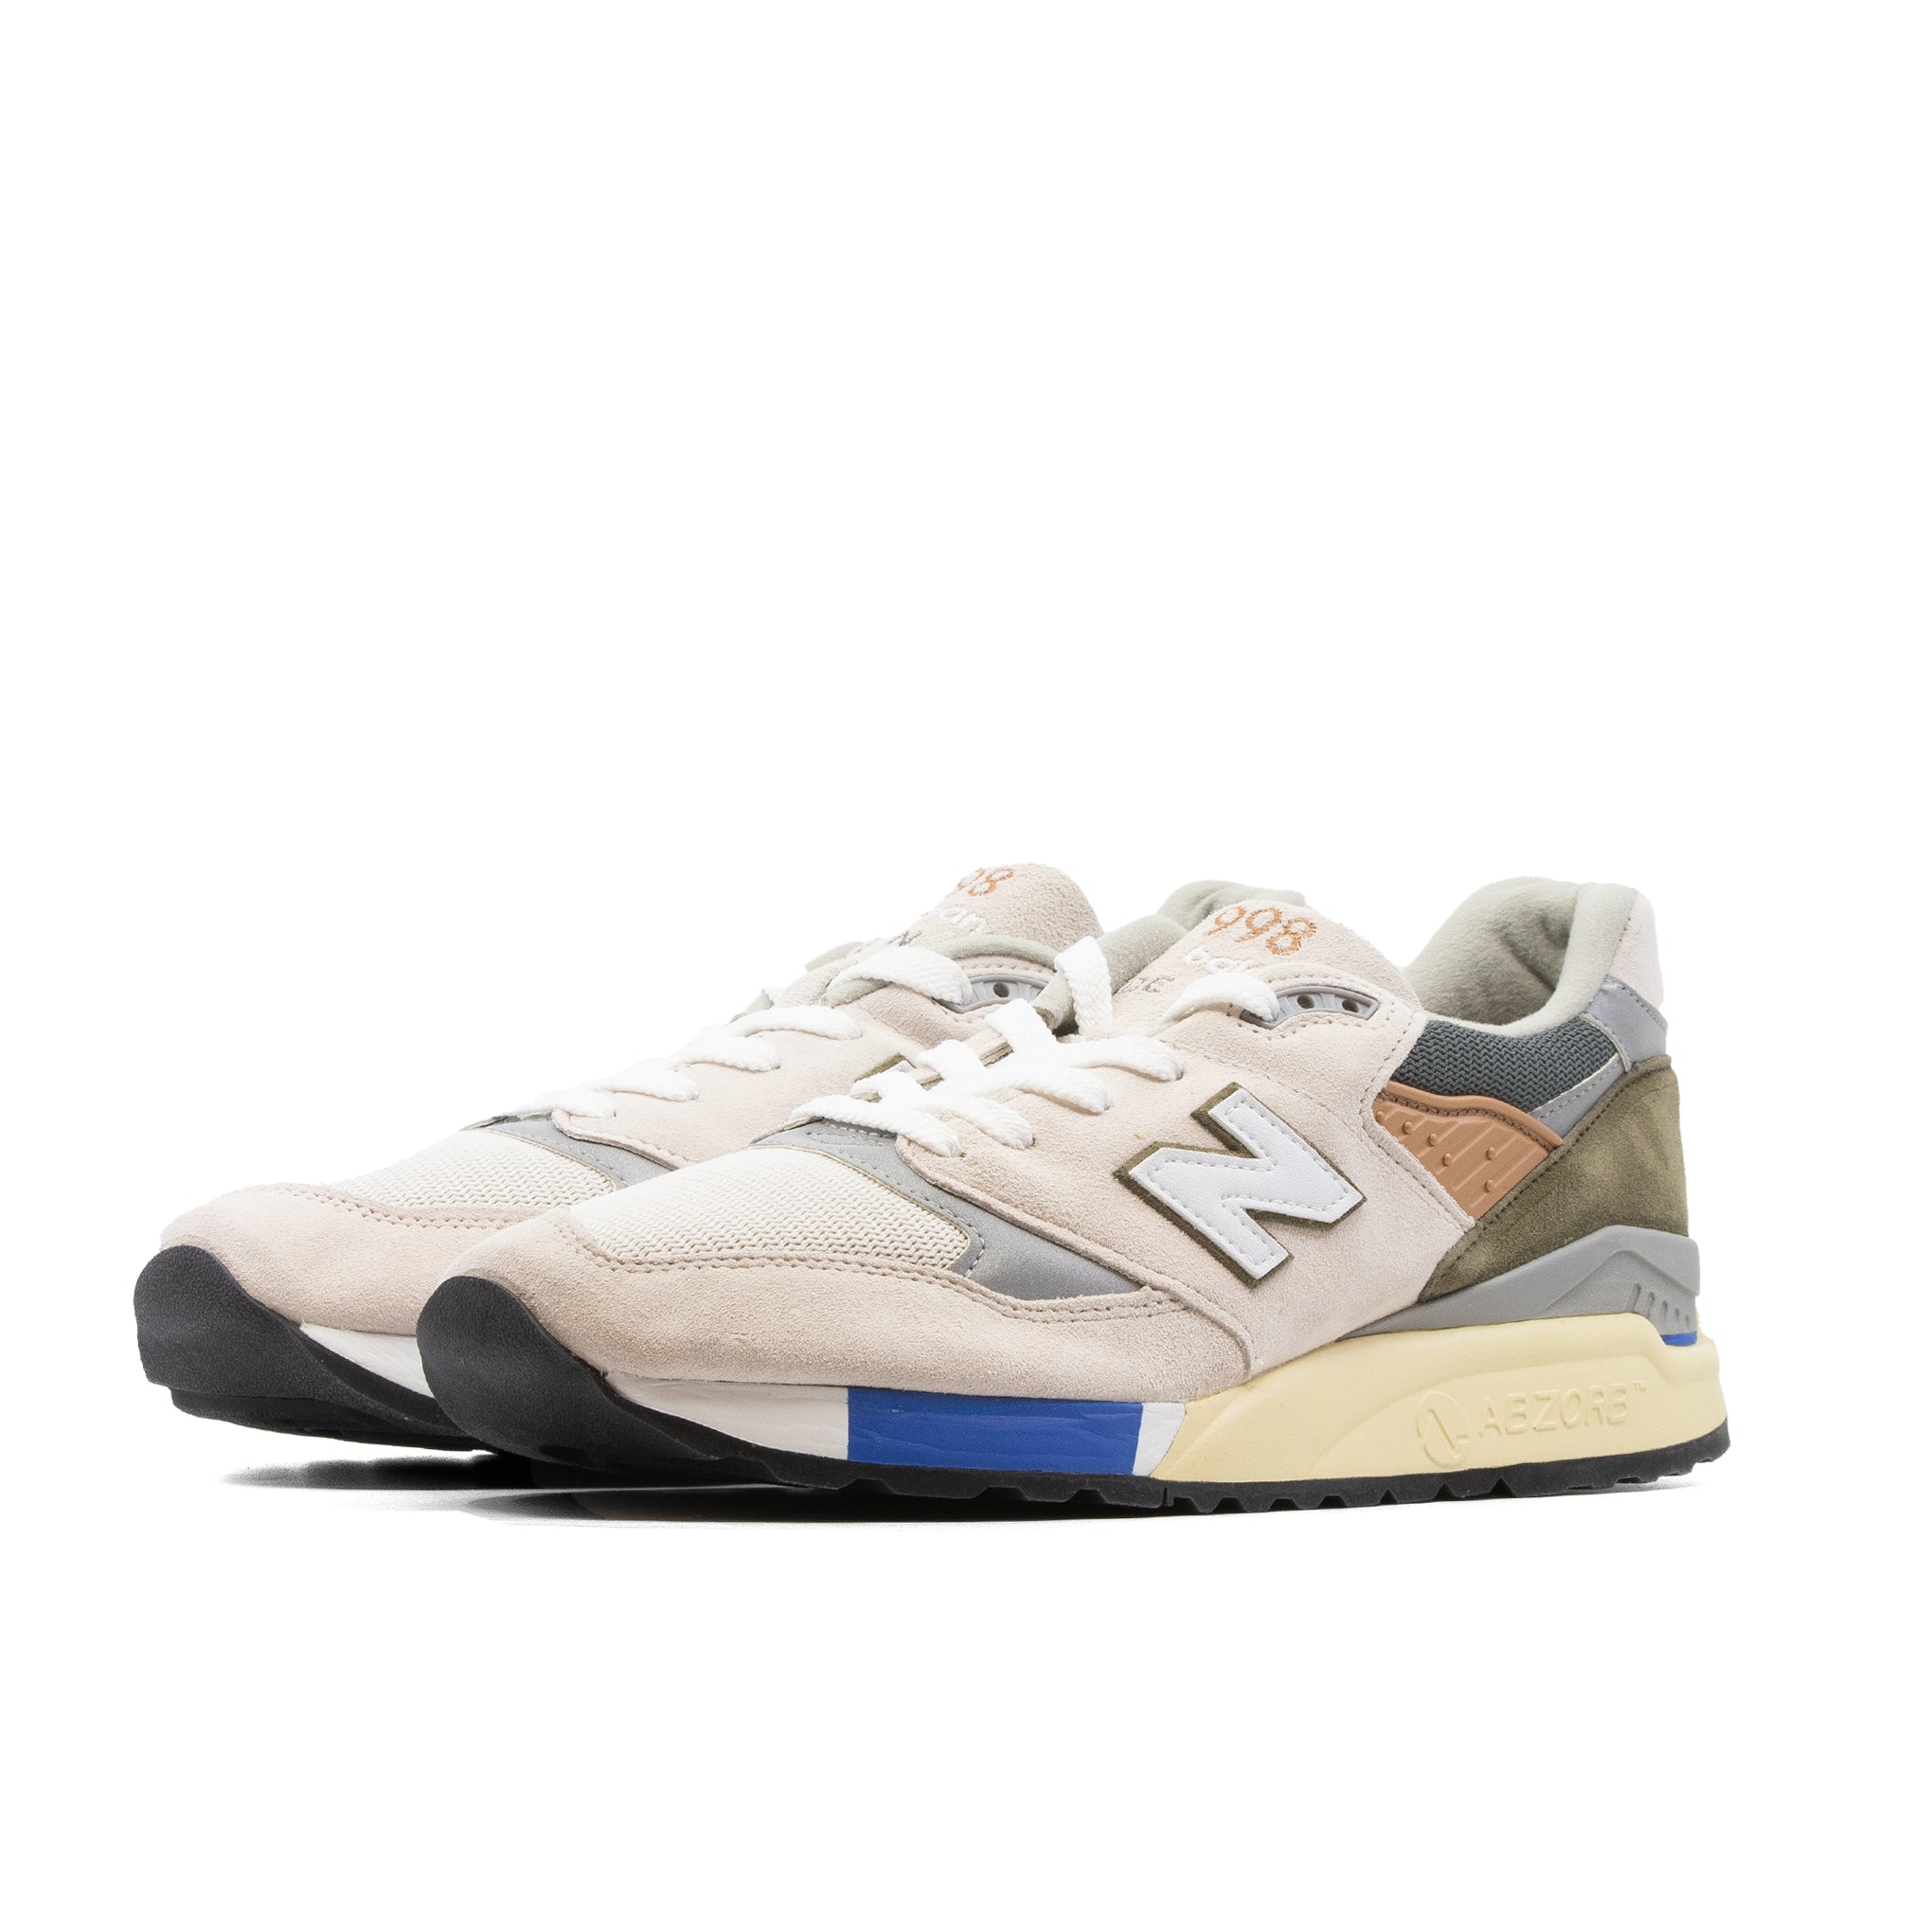 NEW BALANCE 998 CONCEPTS C-NOTE